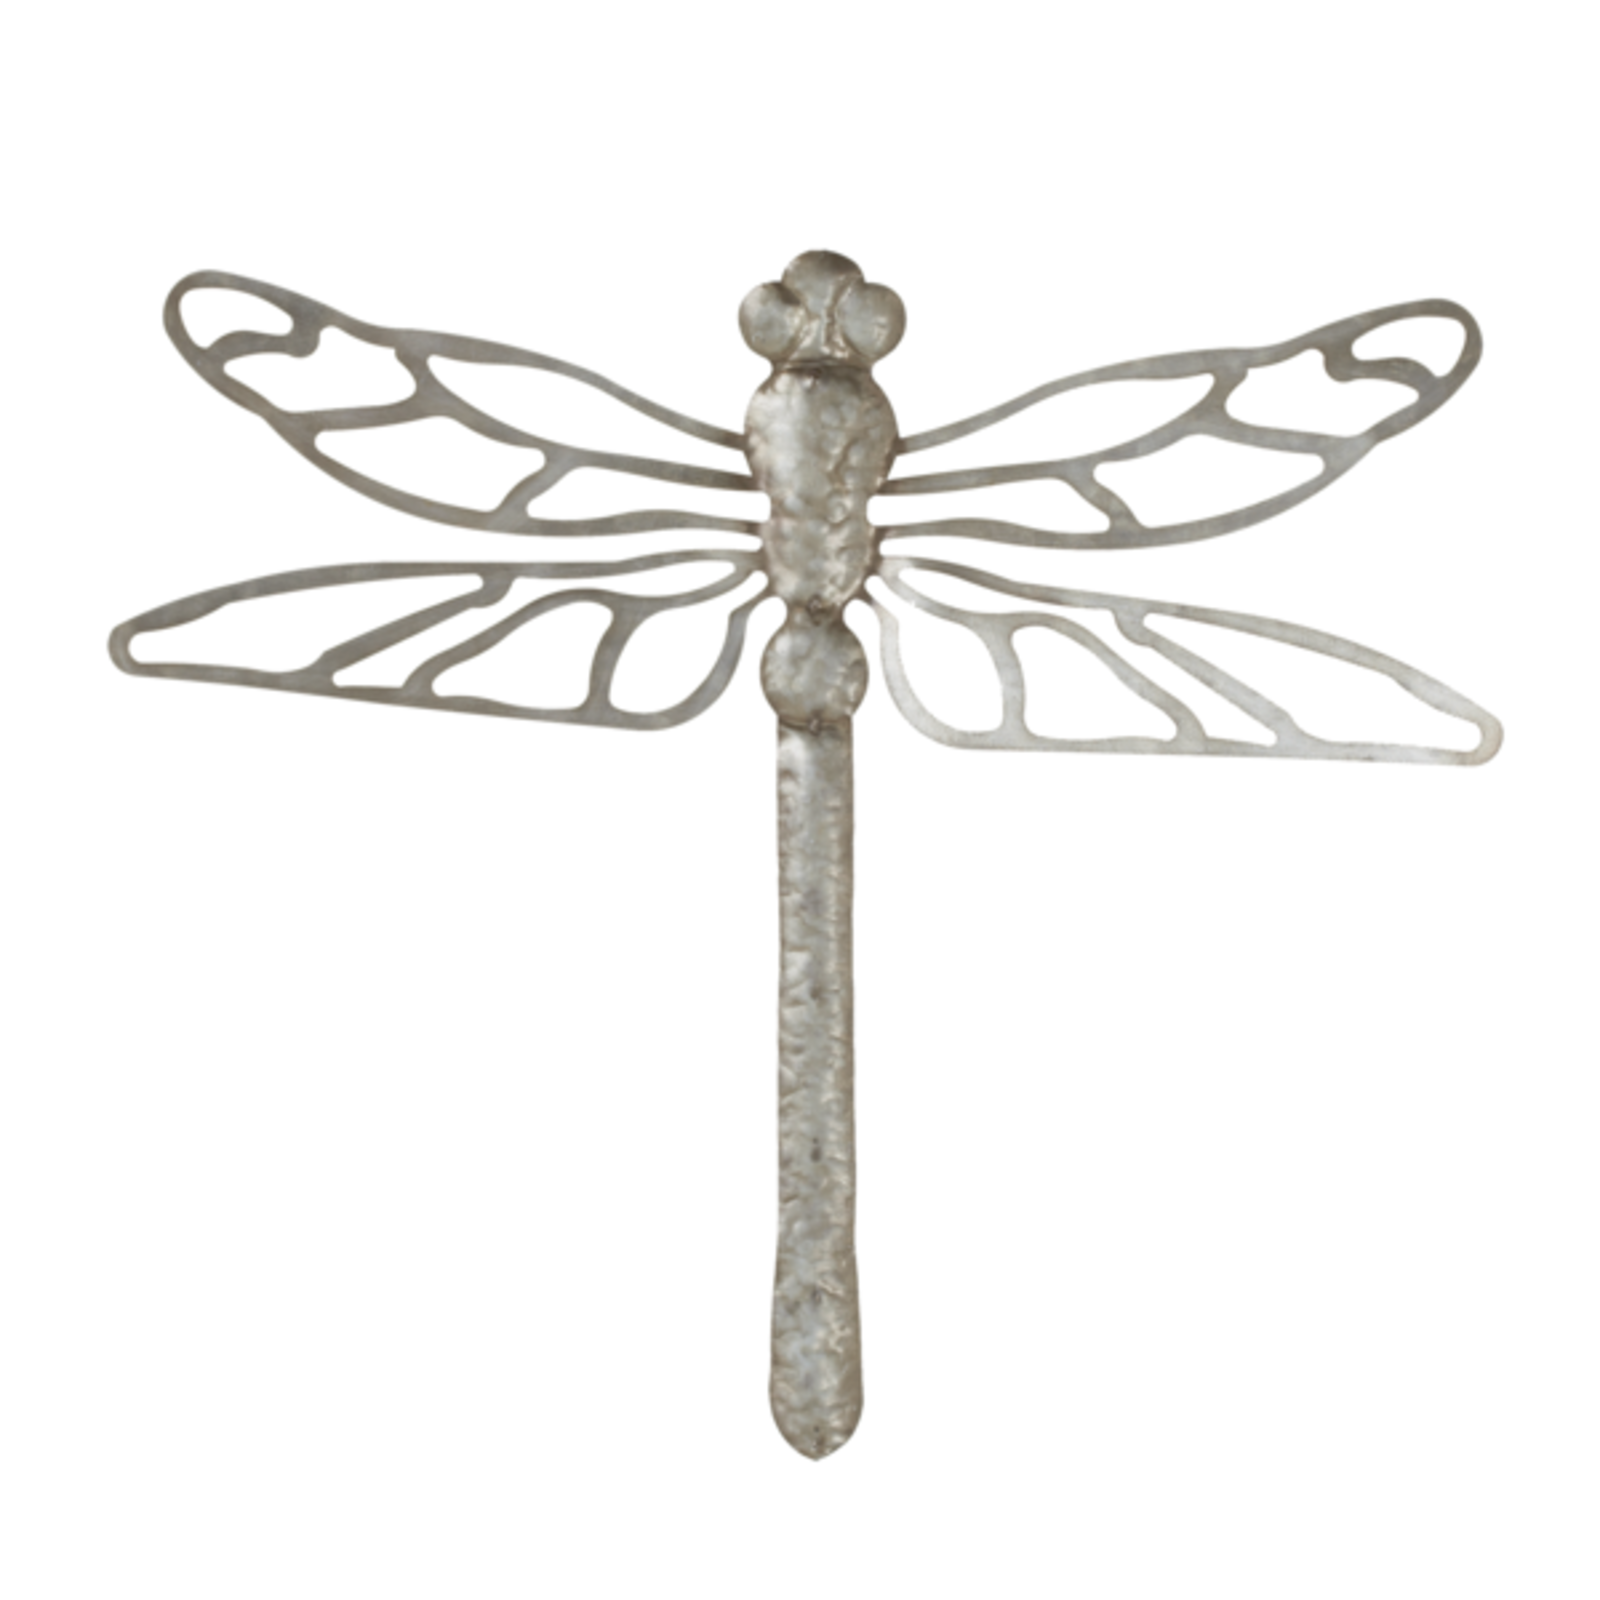 Ganz Galvanized Dragonfly Cut-out Wings Wall Decor 154376 loading=